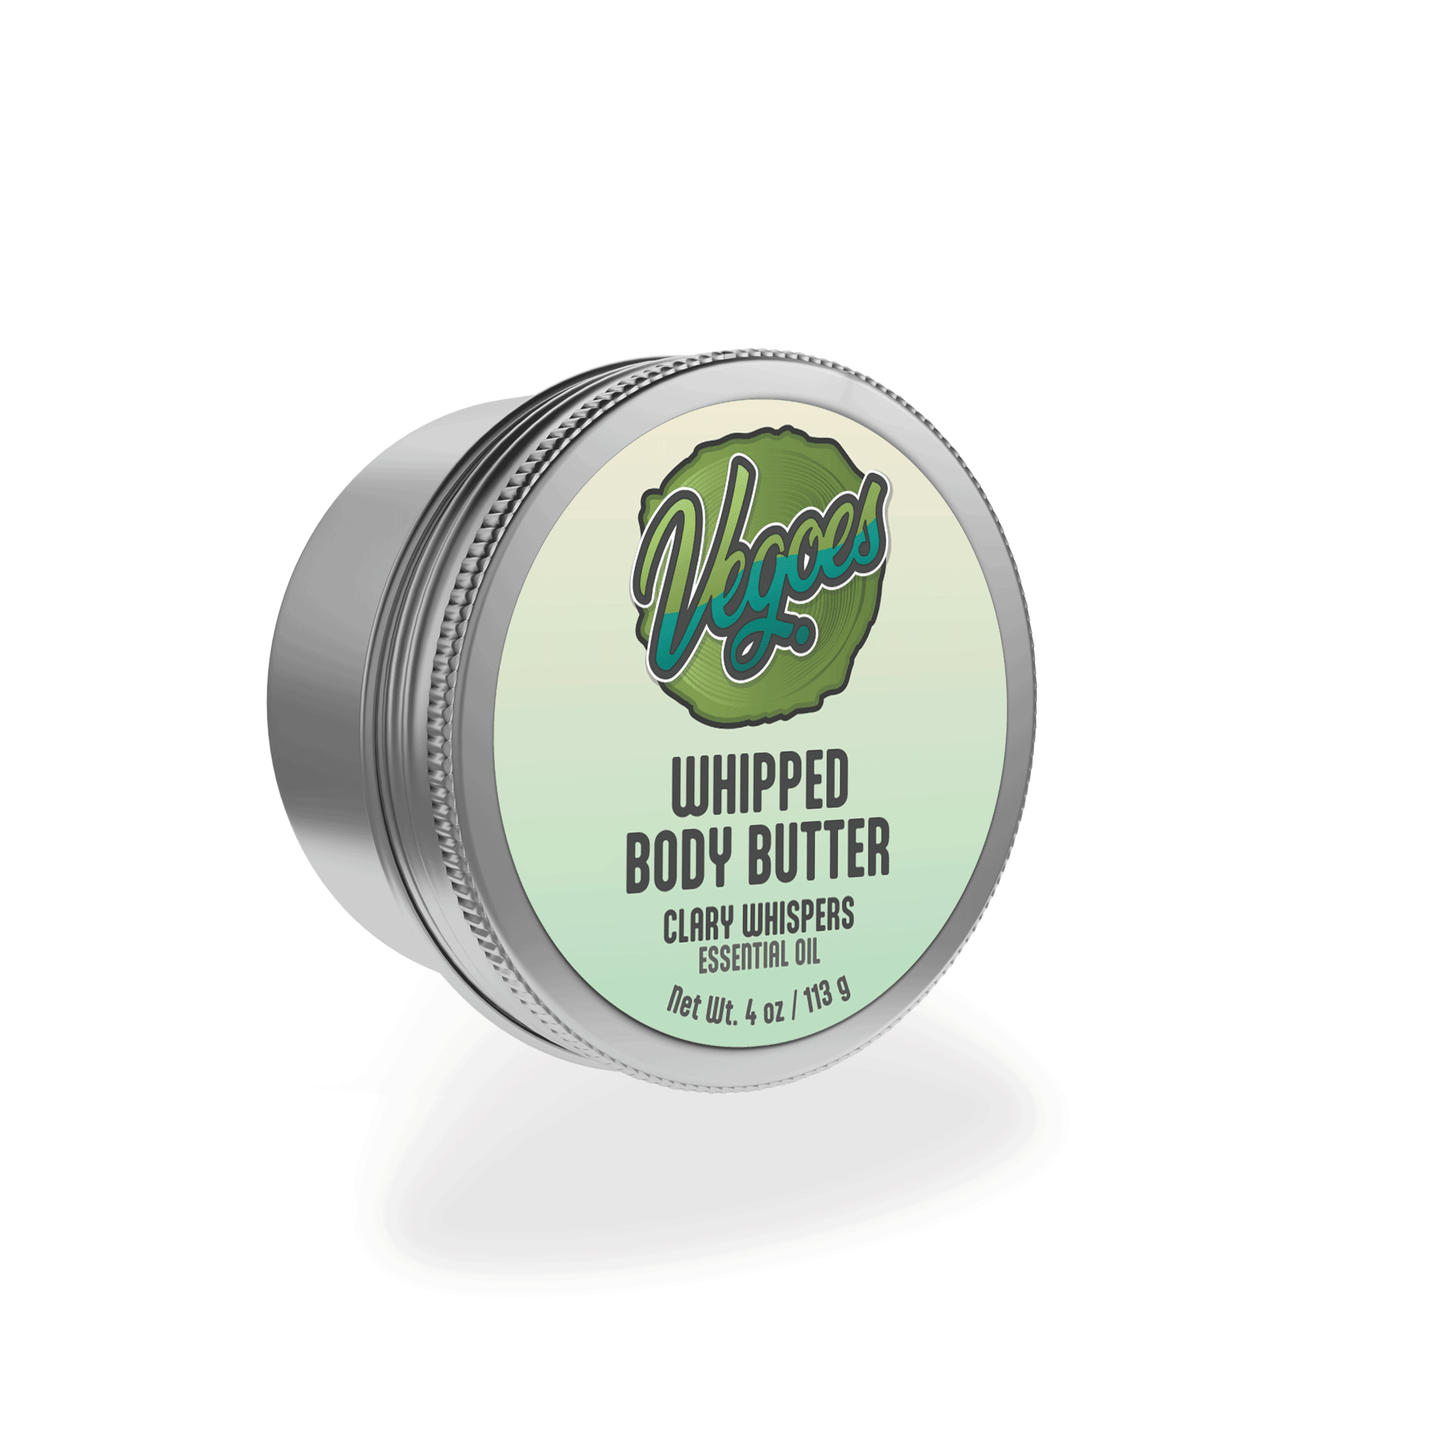 Clary Whispers Whipped Body Butter